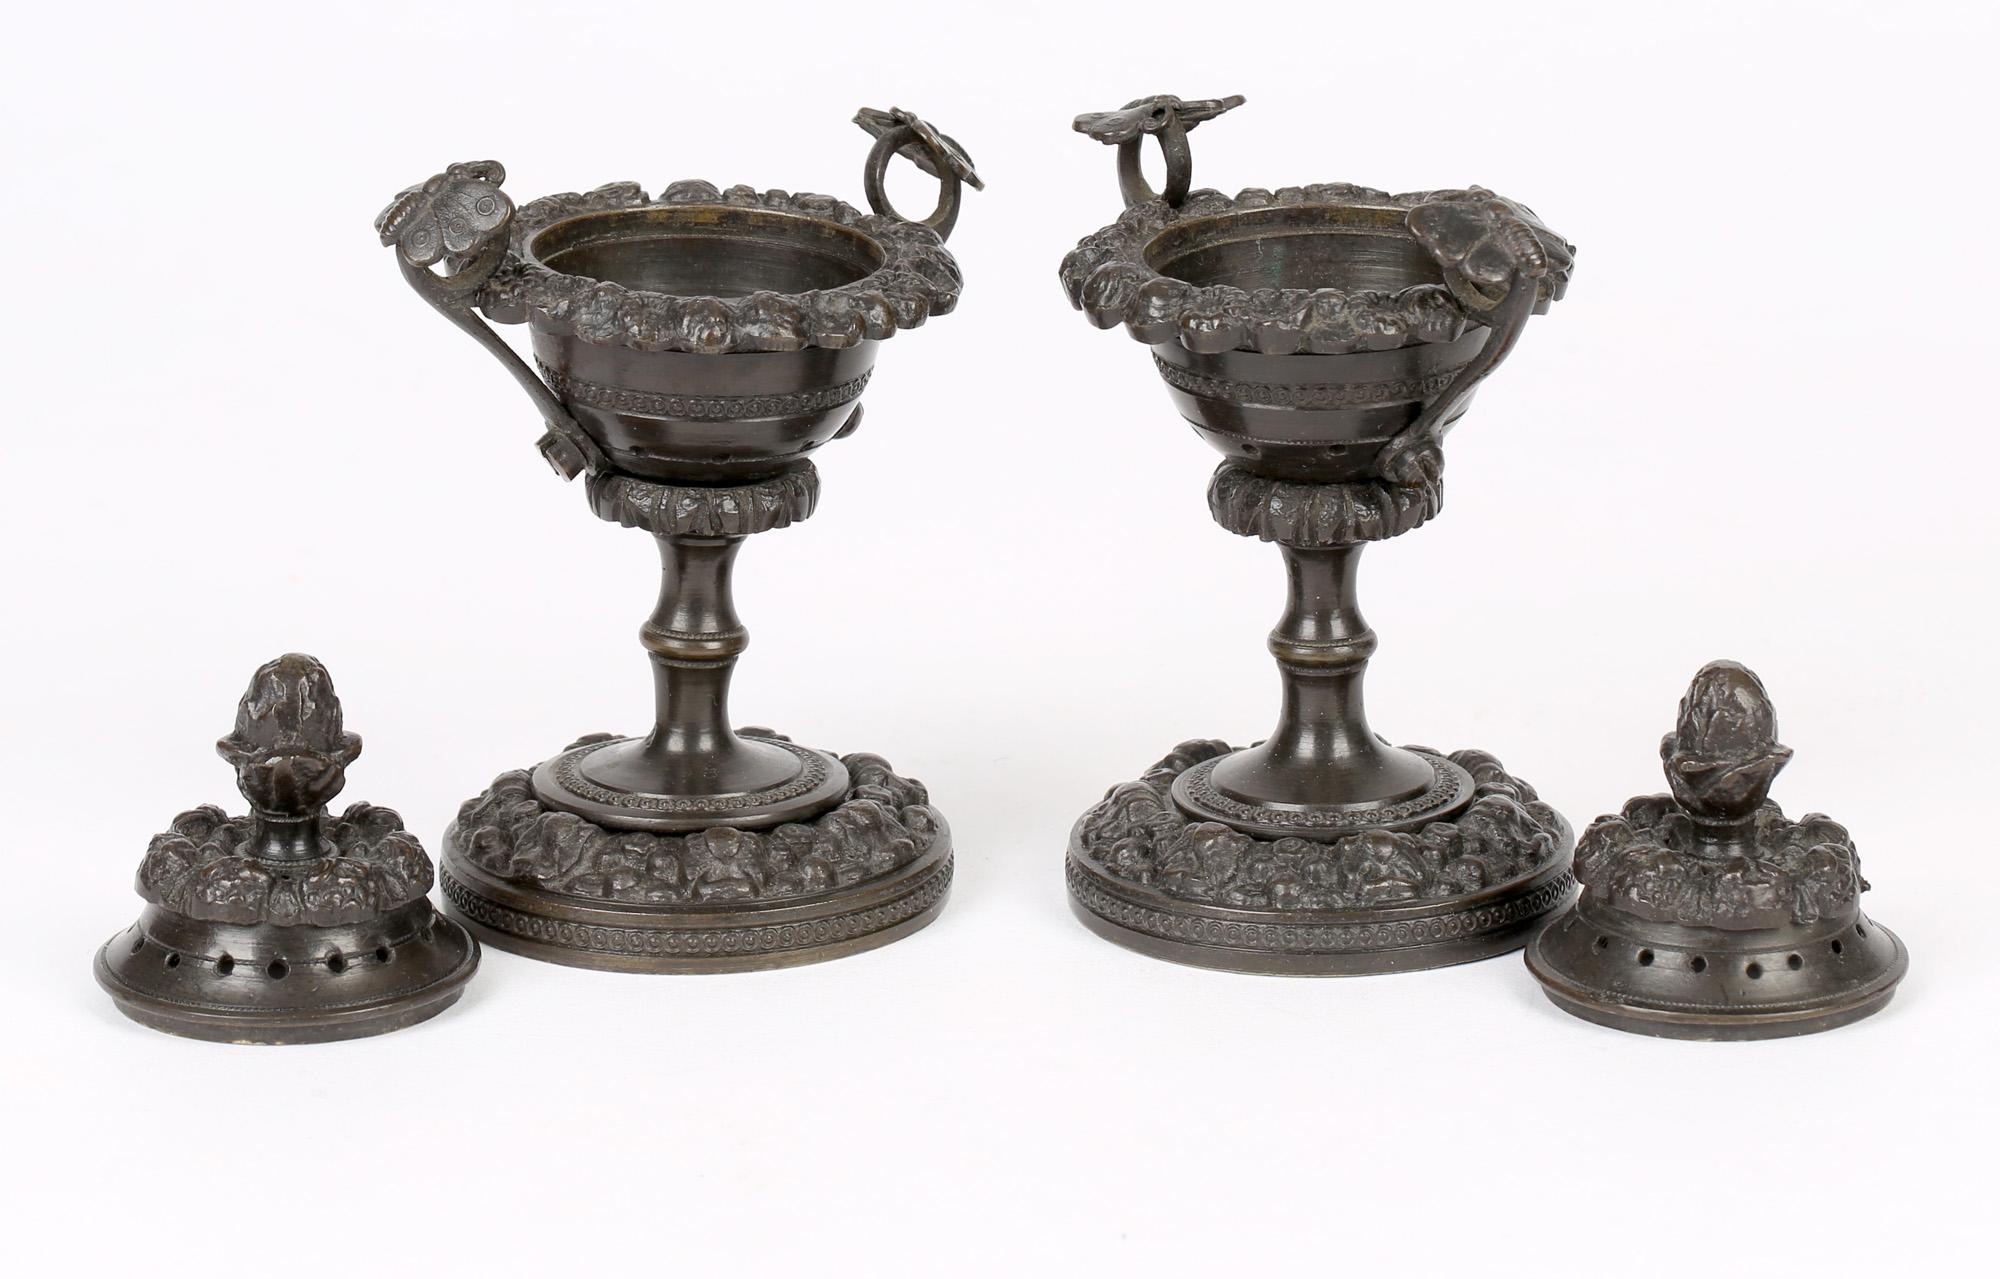 An unusual pair Georgian patinated bronze pot pourri vases and covers with butterfly mounted handles dating from around 1820. The vases stand on a wide rounded pedestal base relief moulded with floral designs with a narrow column stem with a bowl